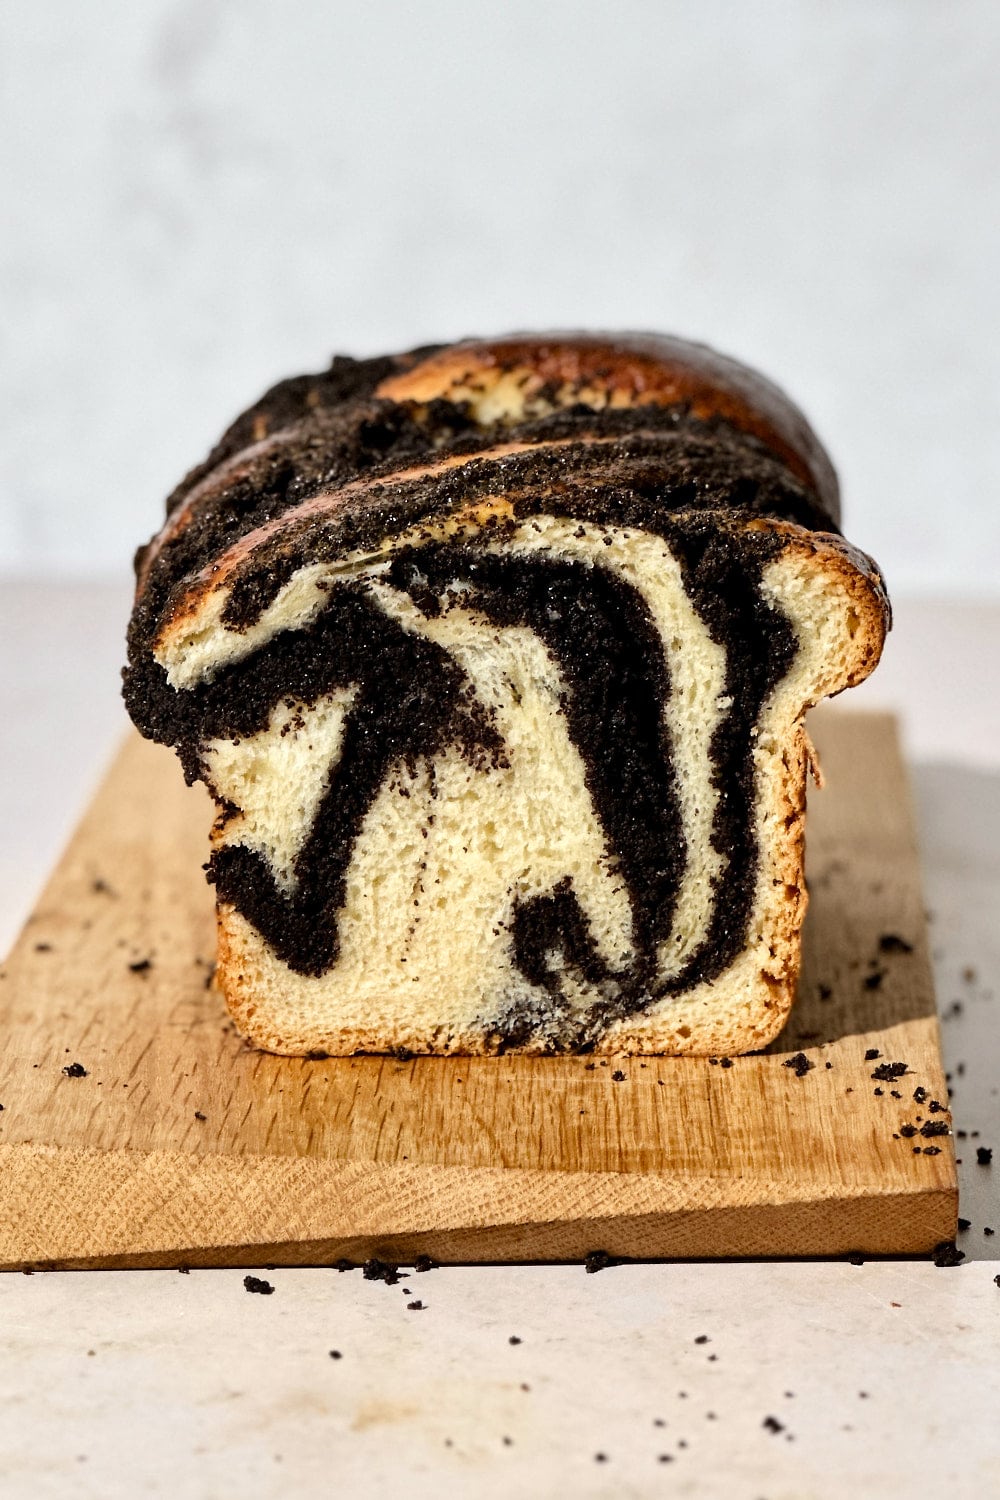 Crumb shot of a sourdough babka with swirls of poppy seed filling.